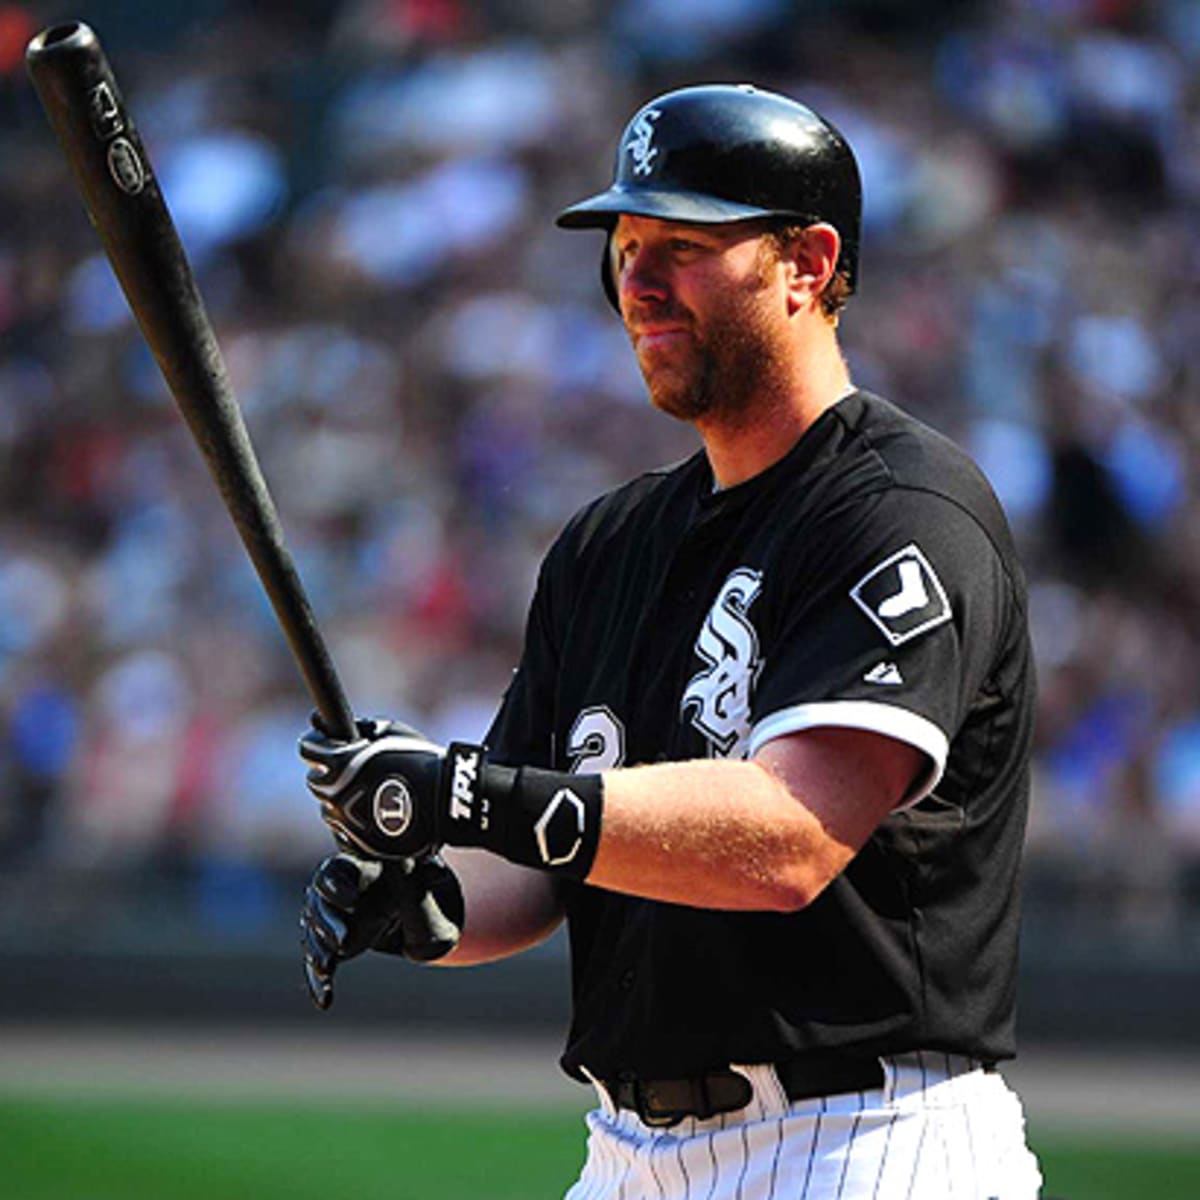 Pierzynski has been all production, not disruption